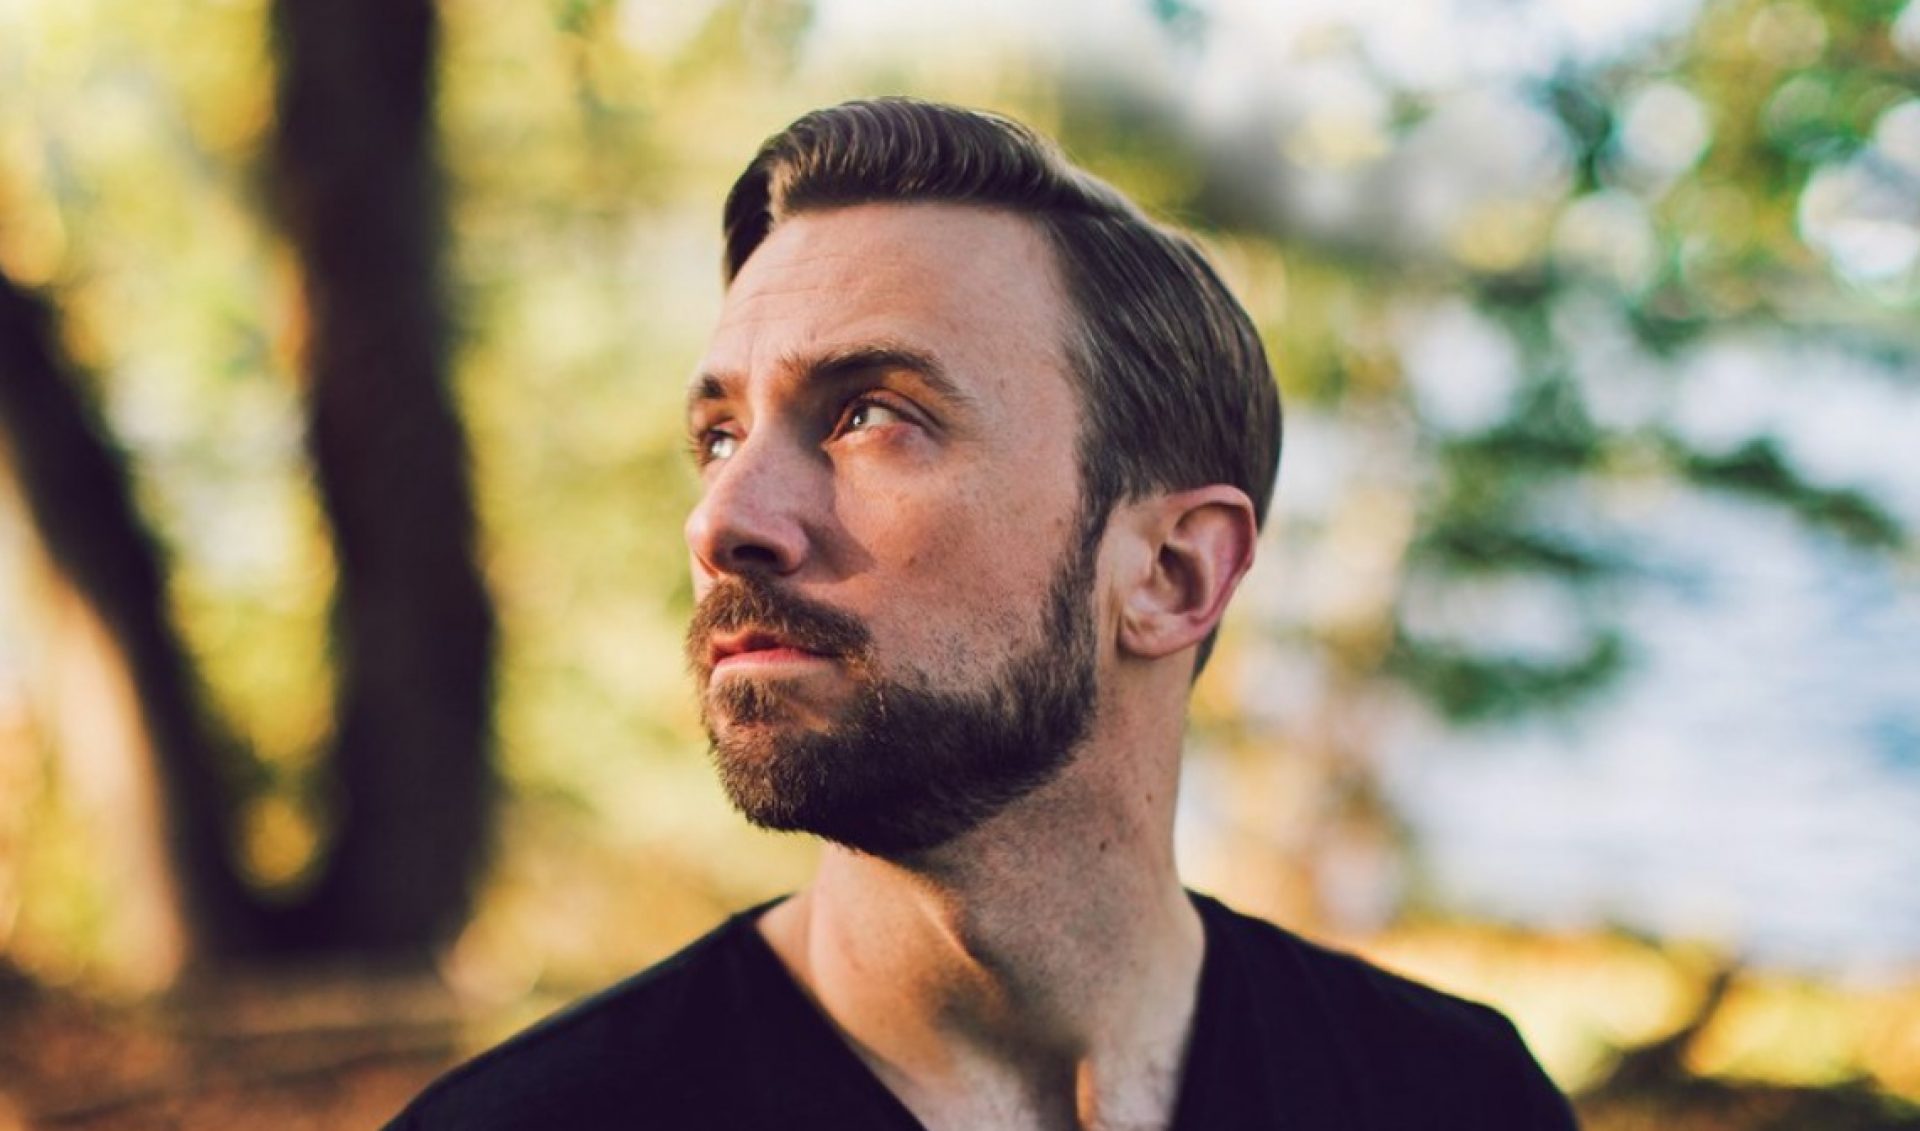 YouTube Star Peter Hollens Tops Billboard Charts With Album Of ‘Legendary Folk Songs’